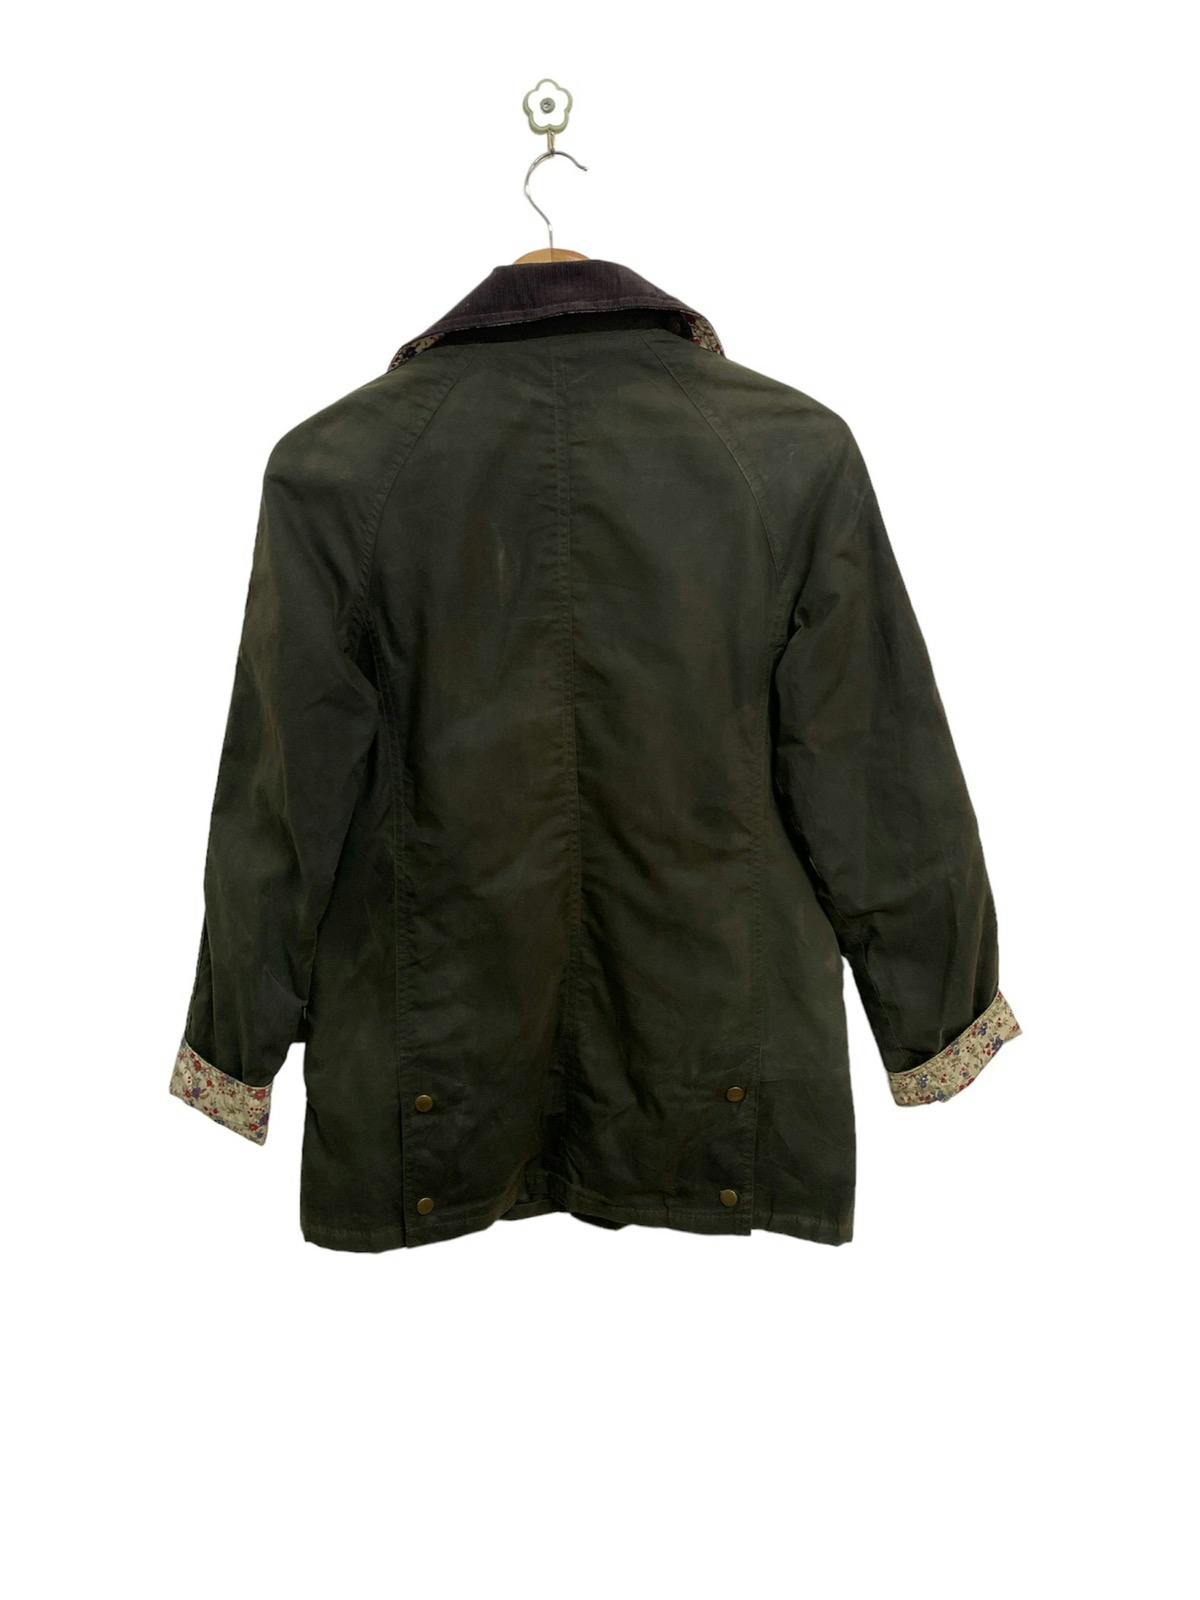 Barbour Flyweight Liberty Beadnell Waxed Jacket - 2